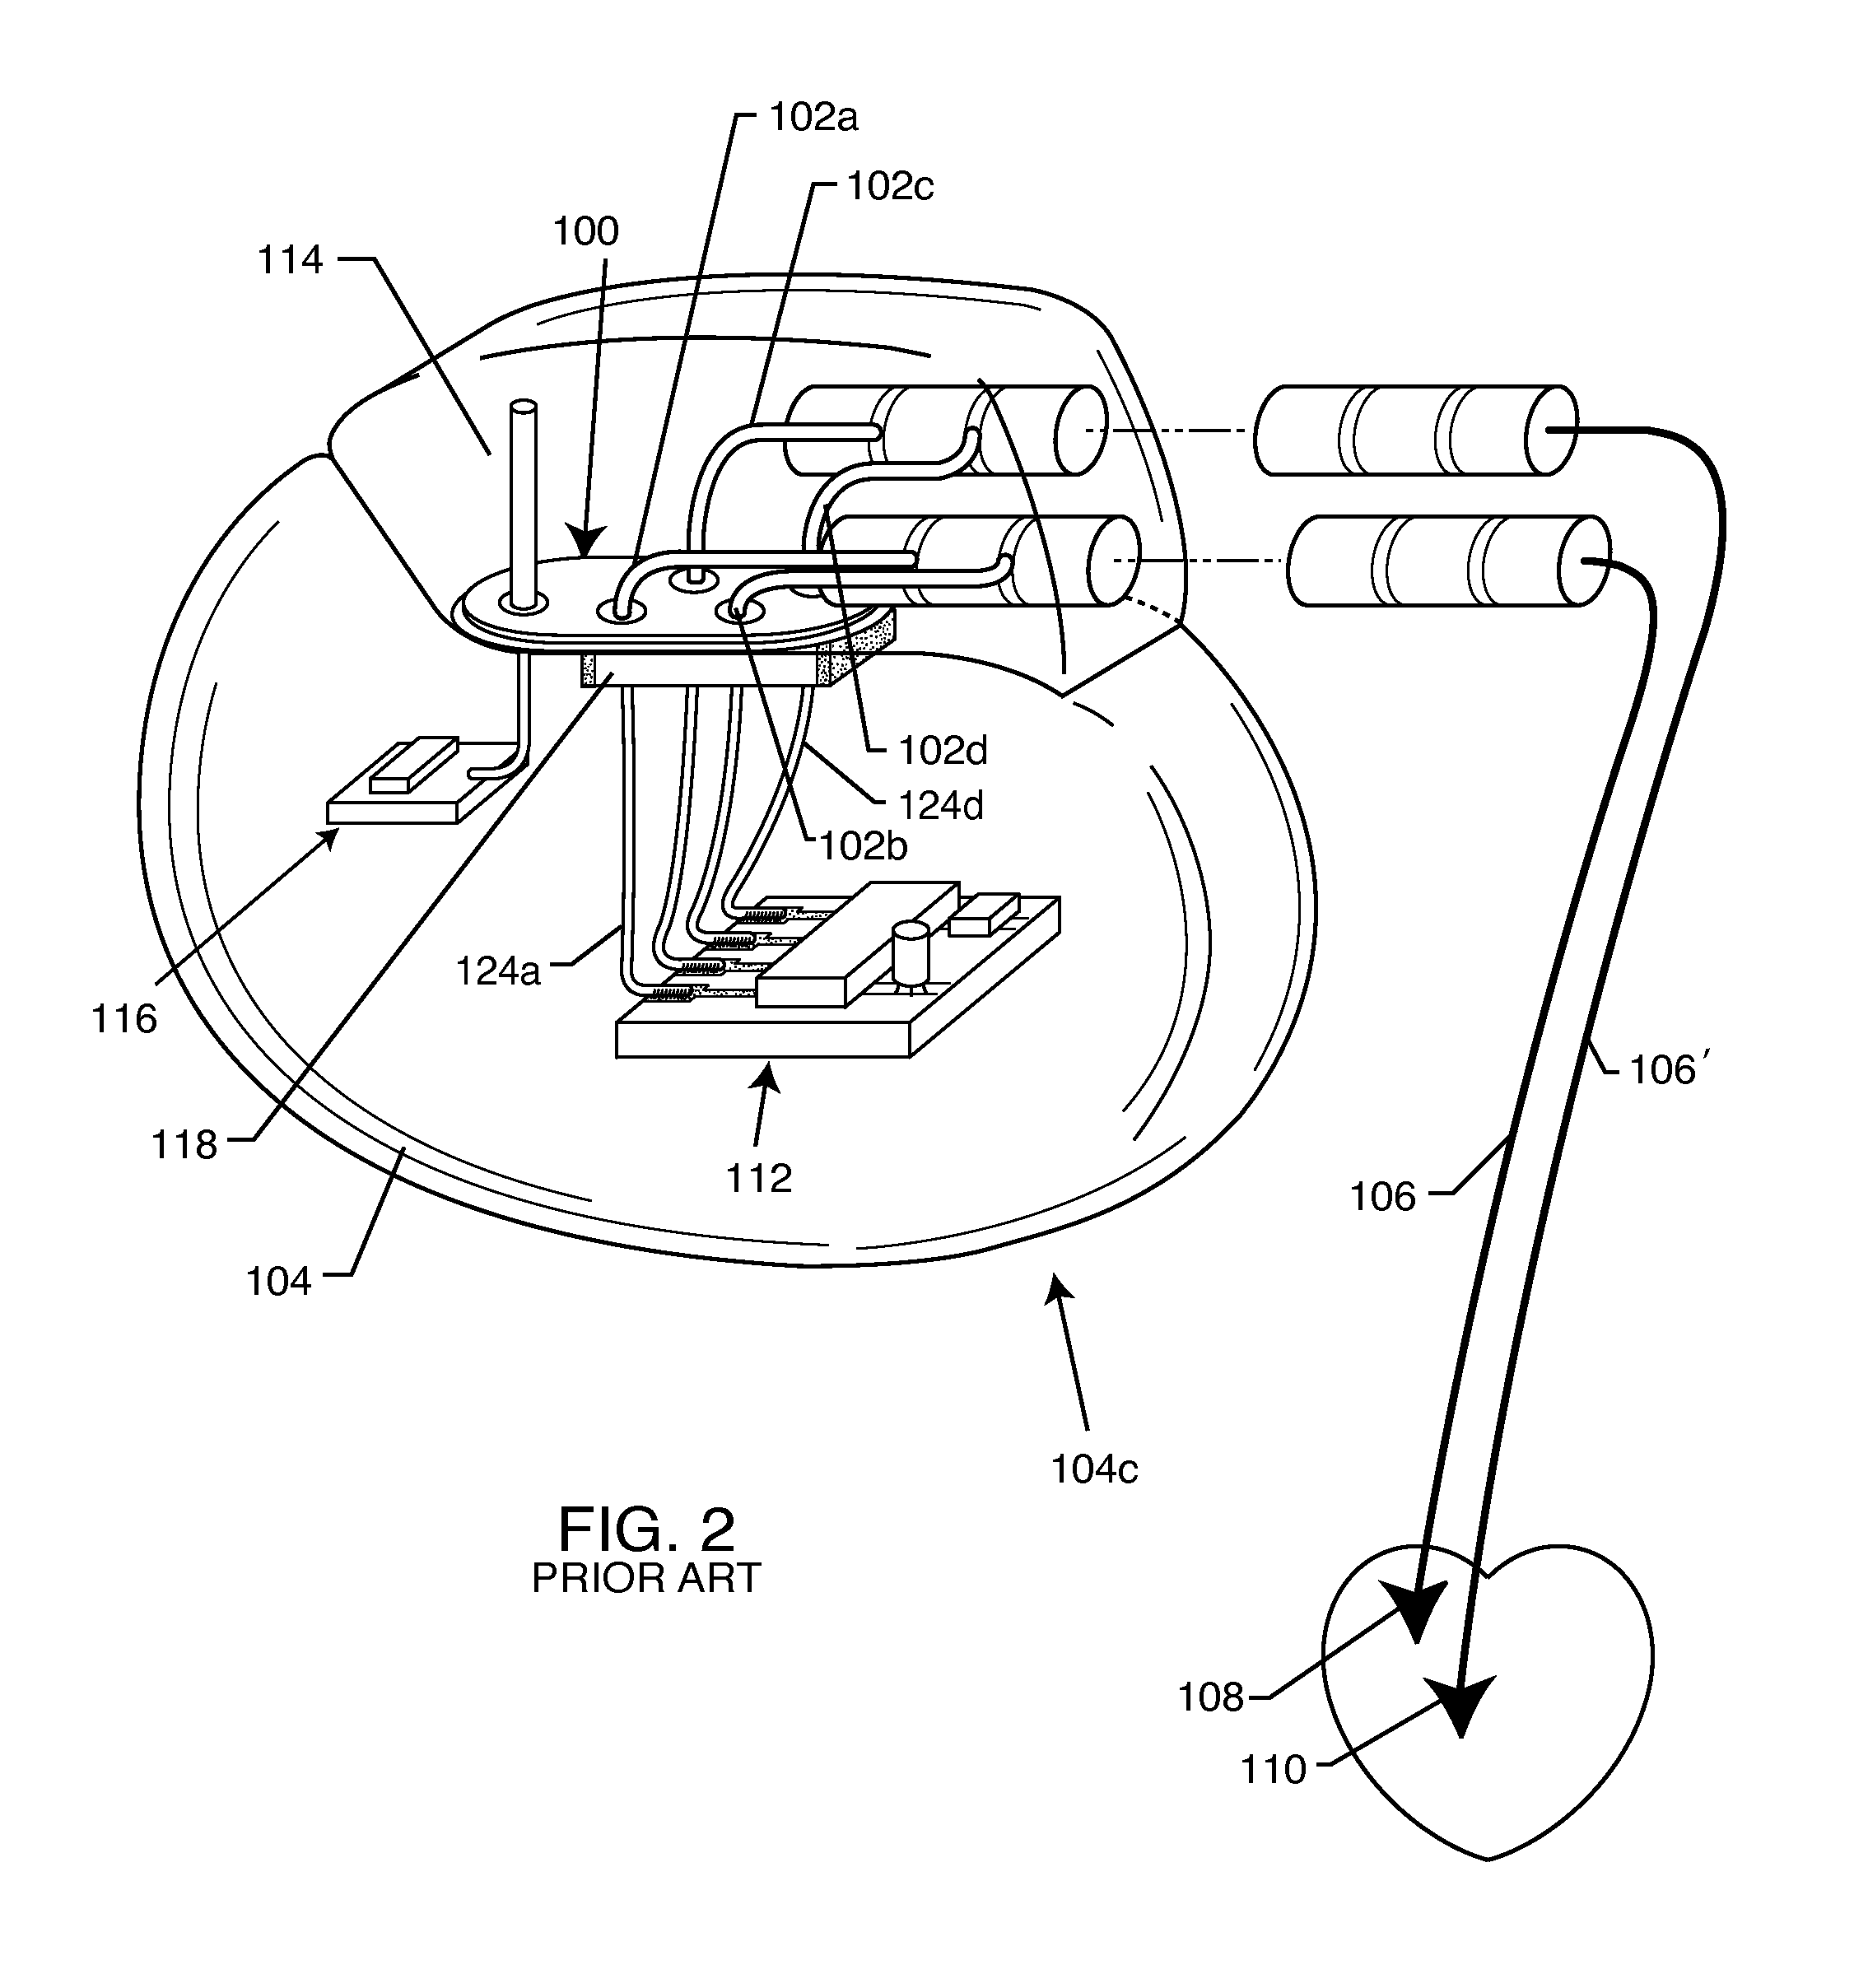 EMI shielded conduit assembly for an active implantable medical device